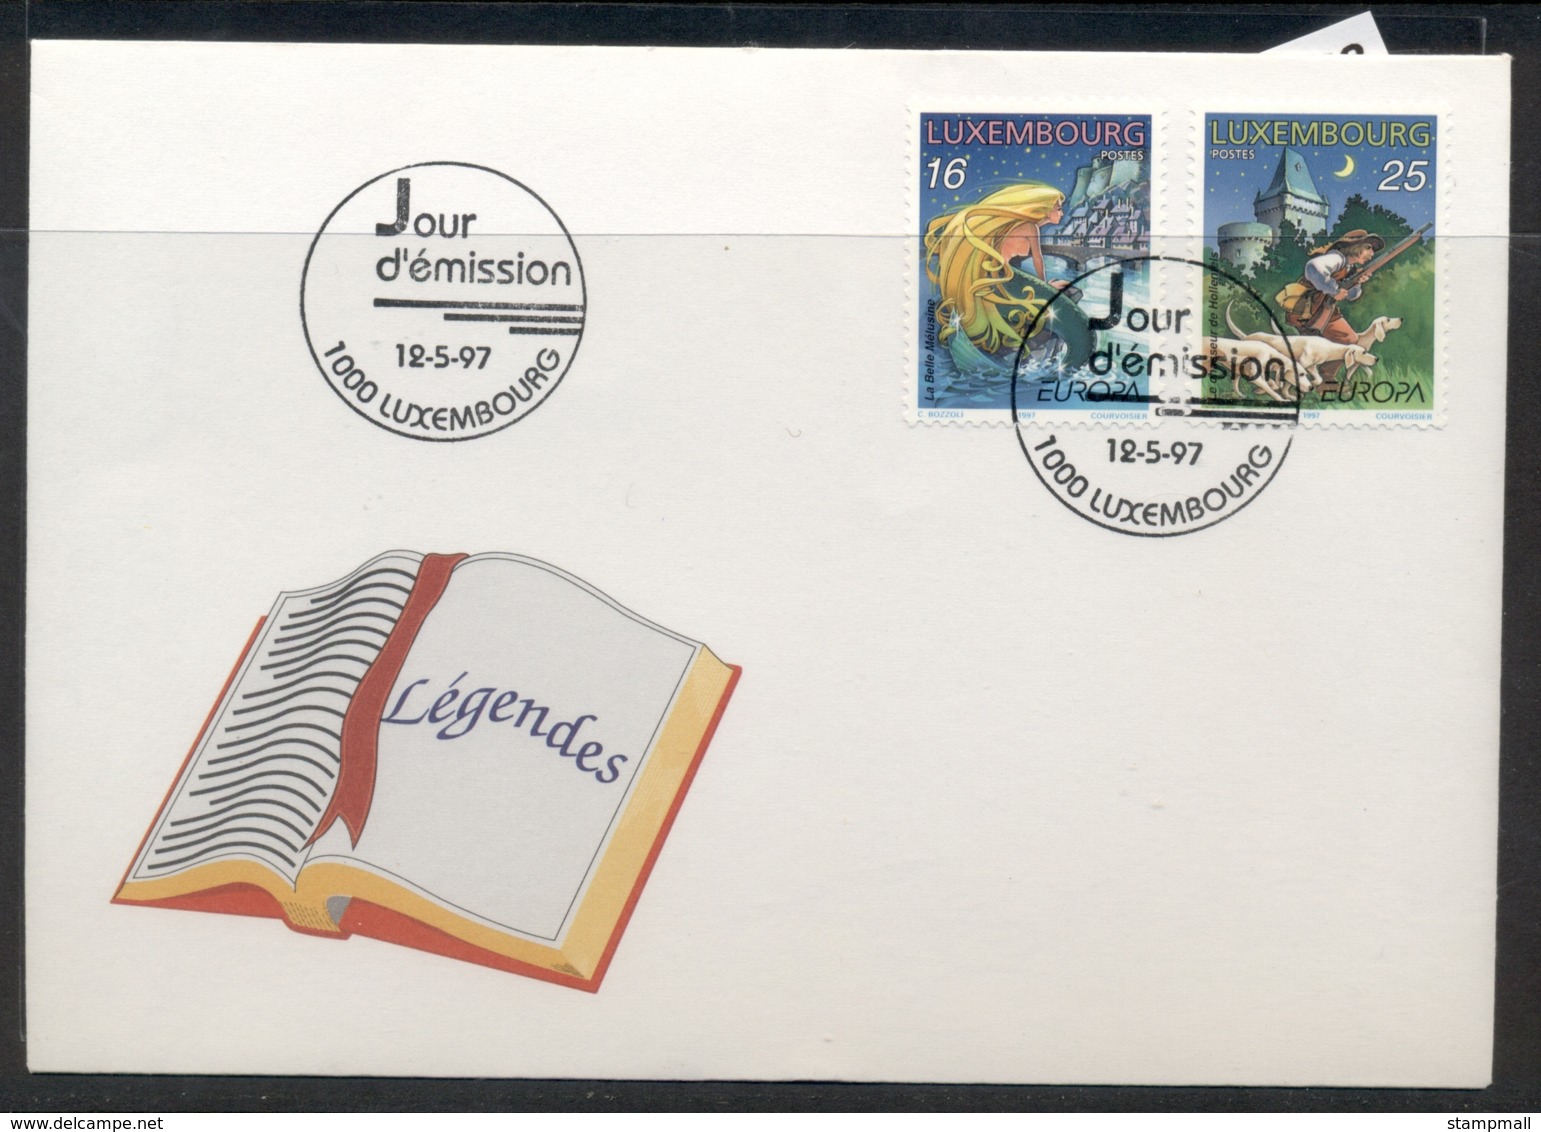 Luxembourg 1997 Europa Myths & Legends FDC - FDC